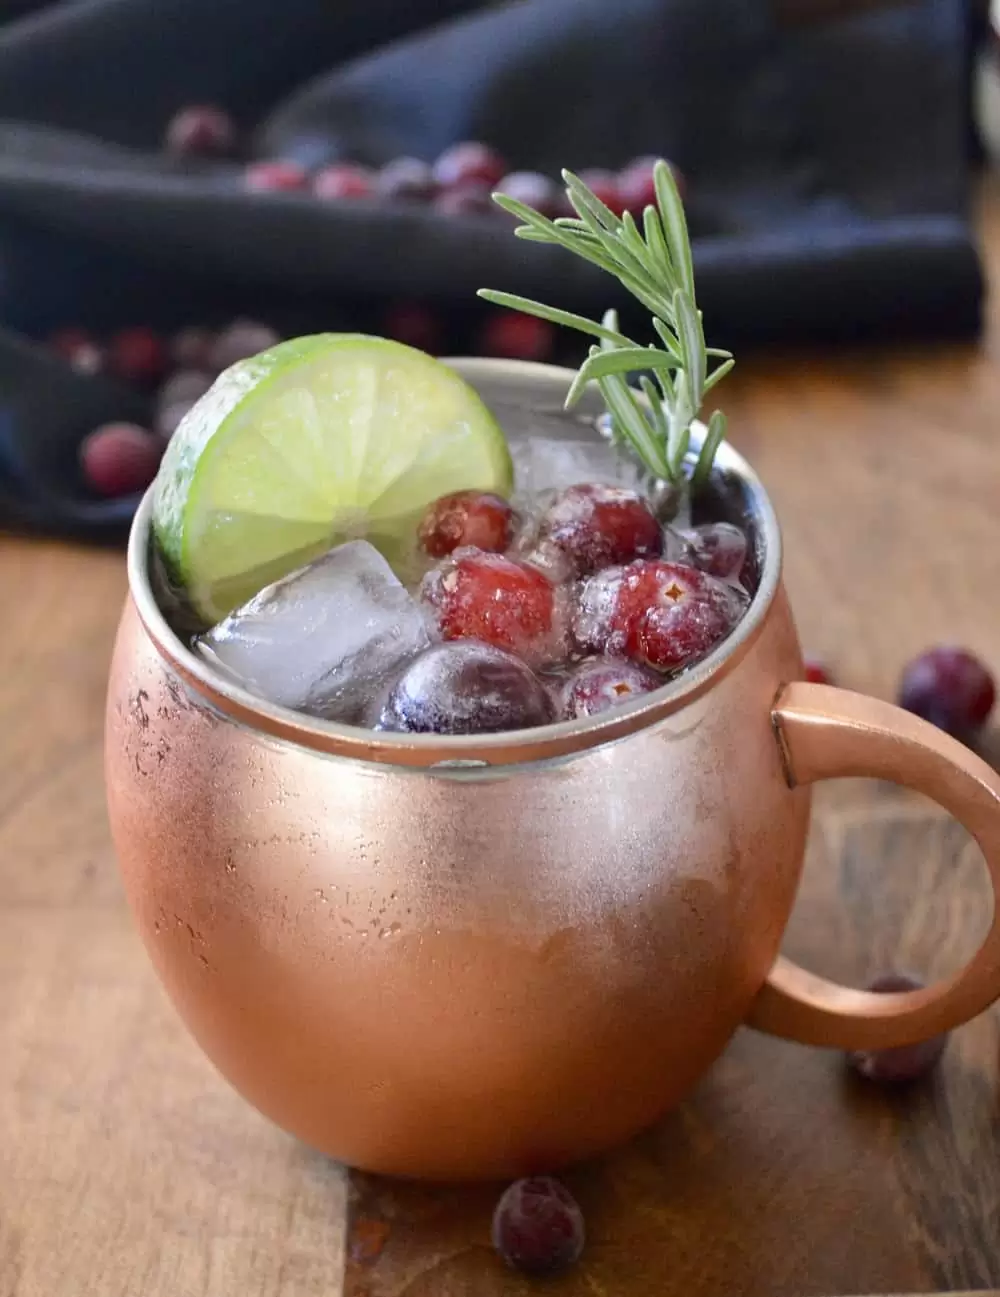 thanksgiving friendsgiving drink ideas and cranberry moscow recipes that your friends will love.